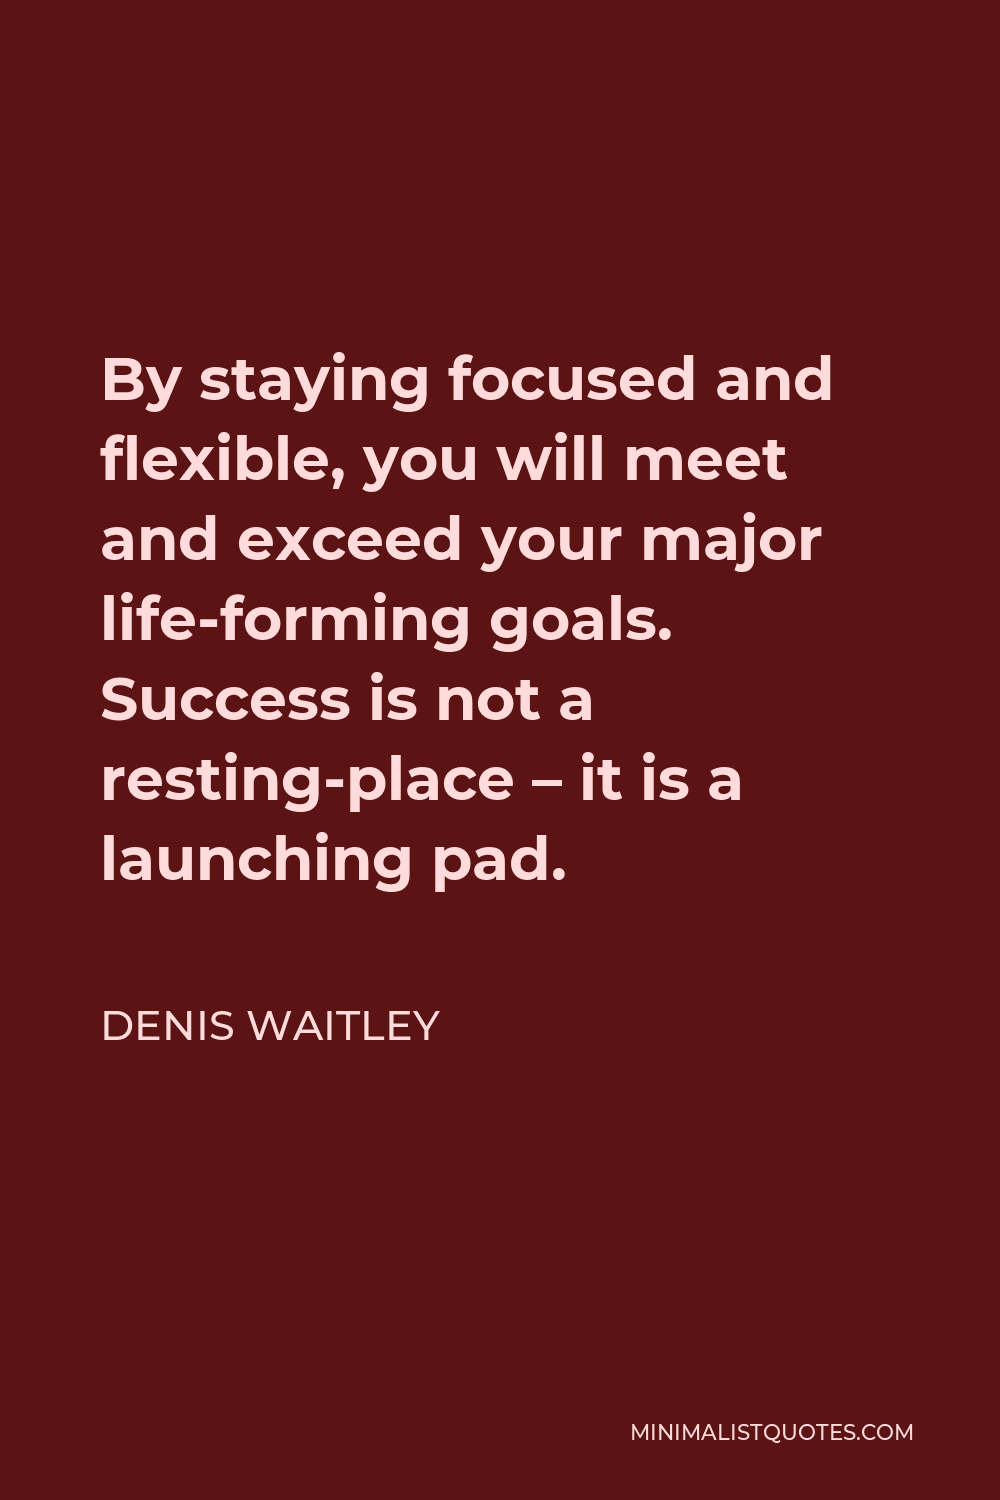 Denis Waitley Quote - By staying focused and flexible, you will meet and exceed your major life-forming goals. Success is not a resting-place – it is a launching pad.